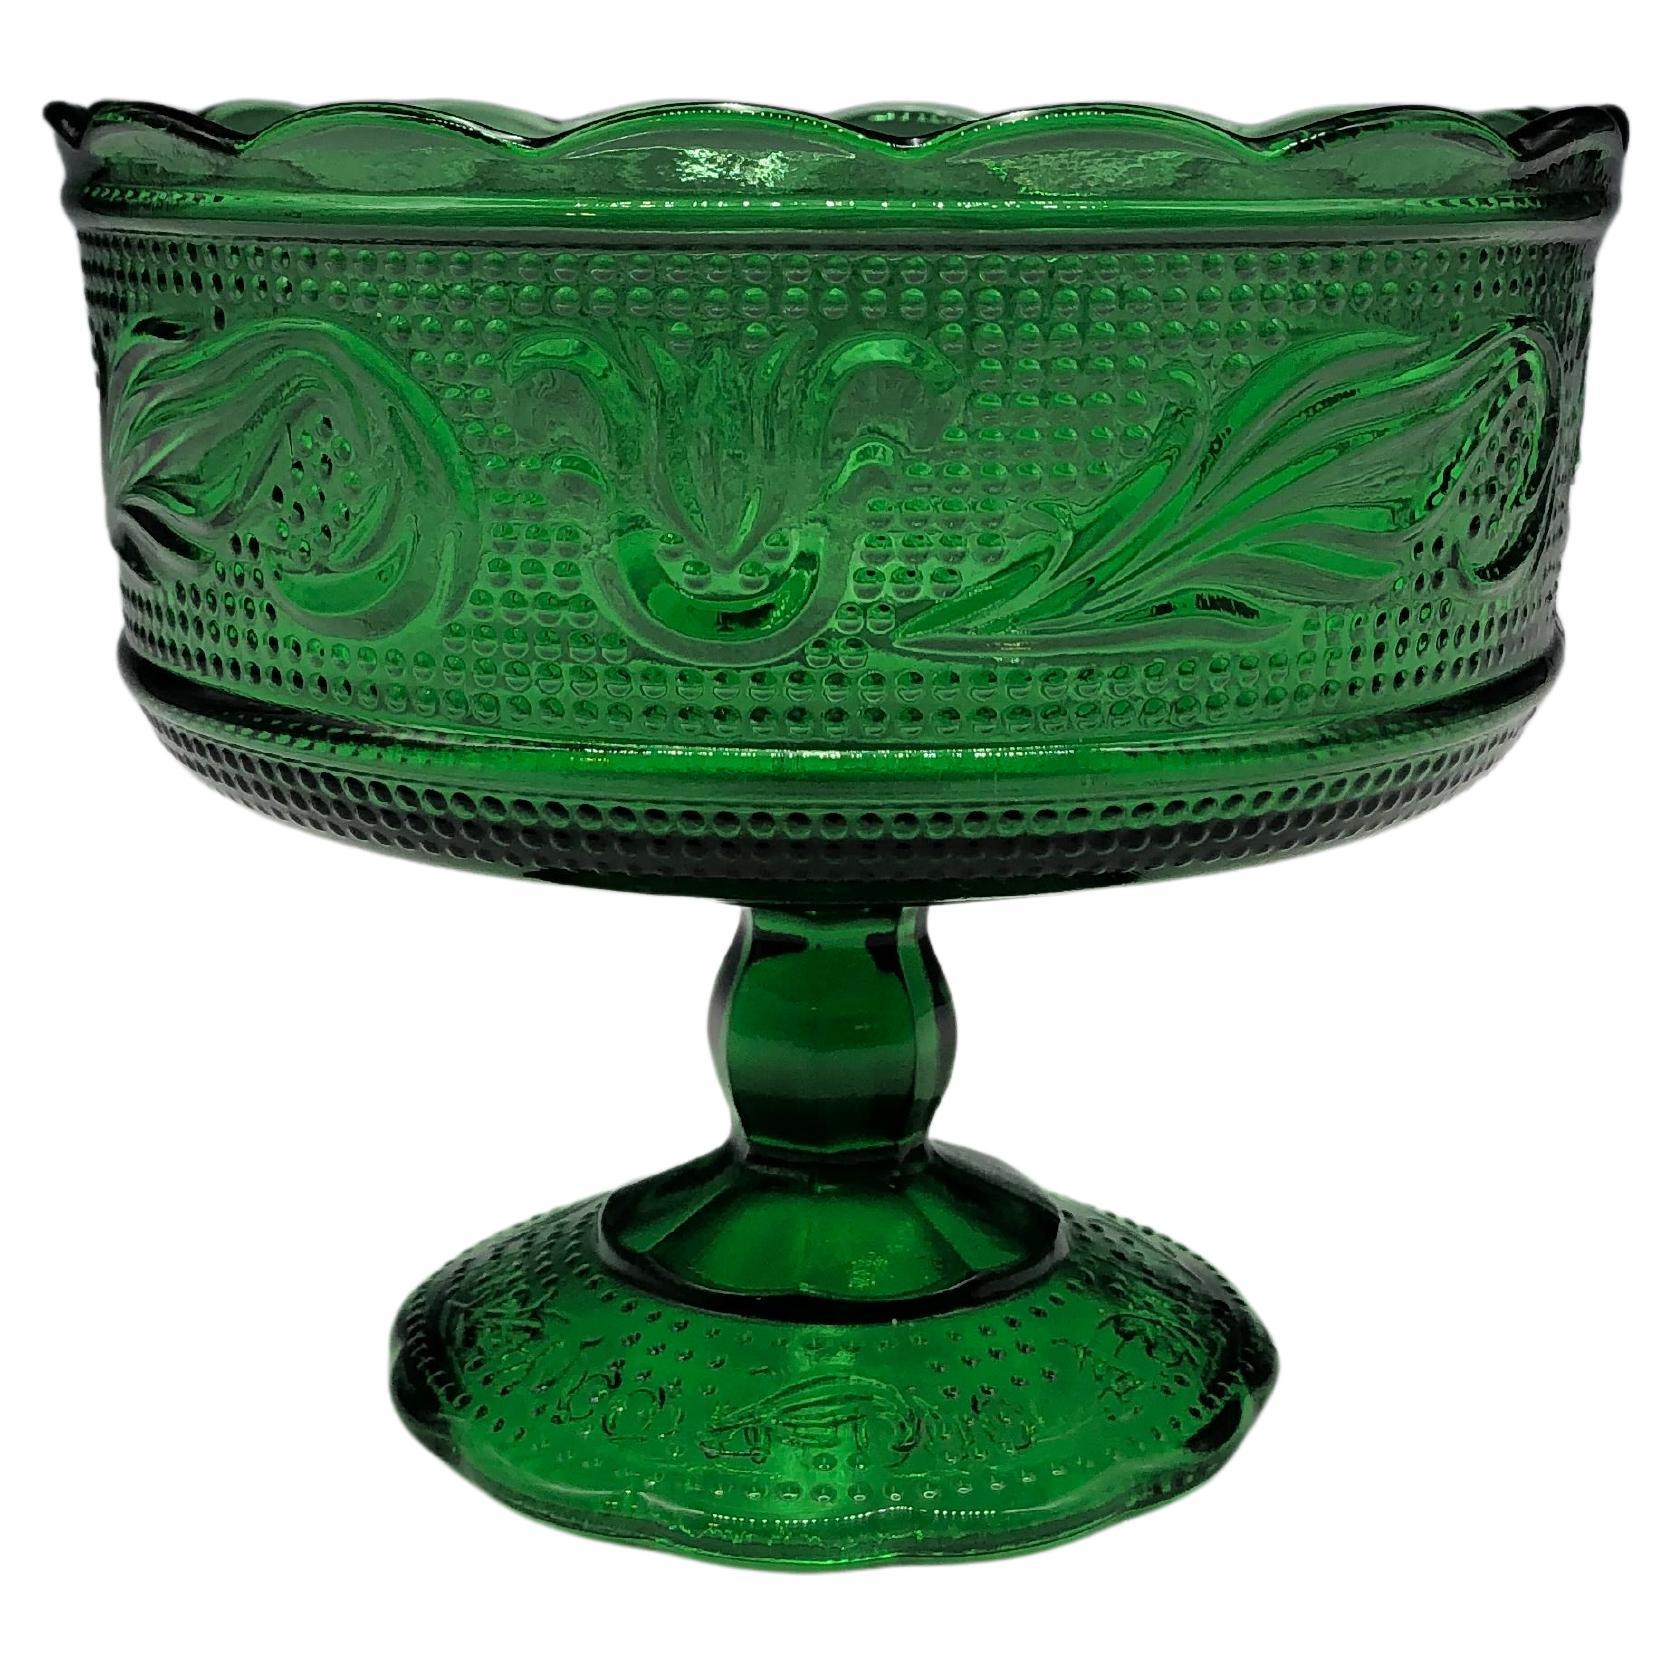 Vintage 1960s E.O Brody Co Emerald Green Pressed Glass Candy / Compote Dish  For Sale